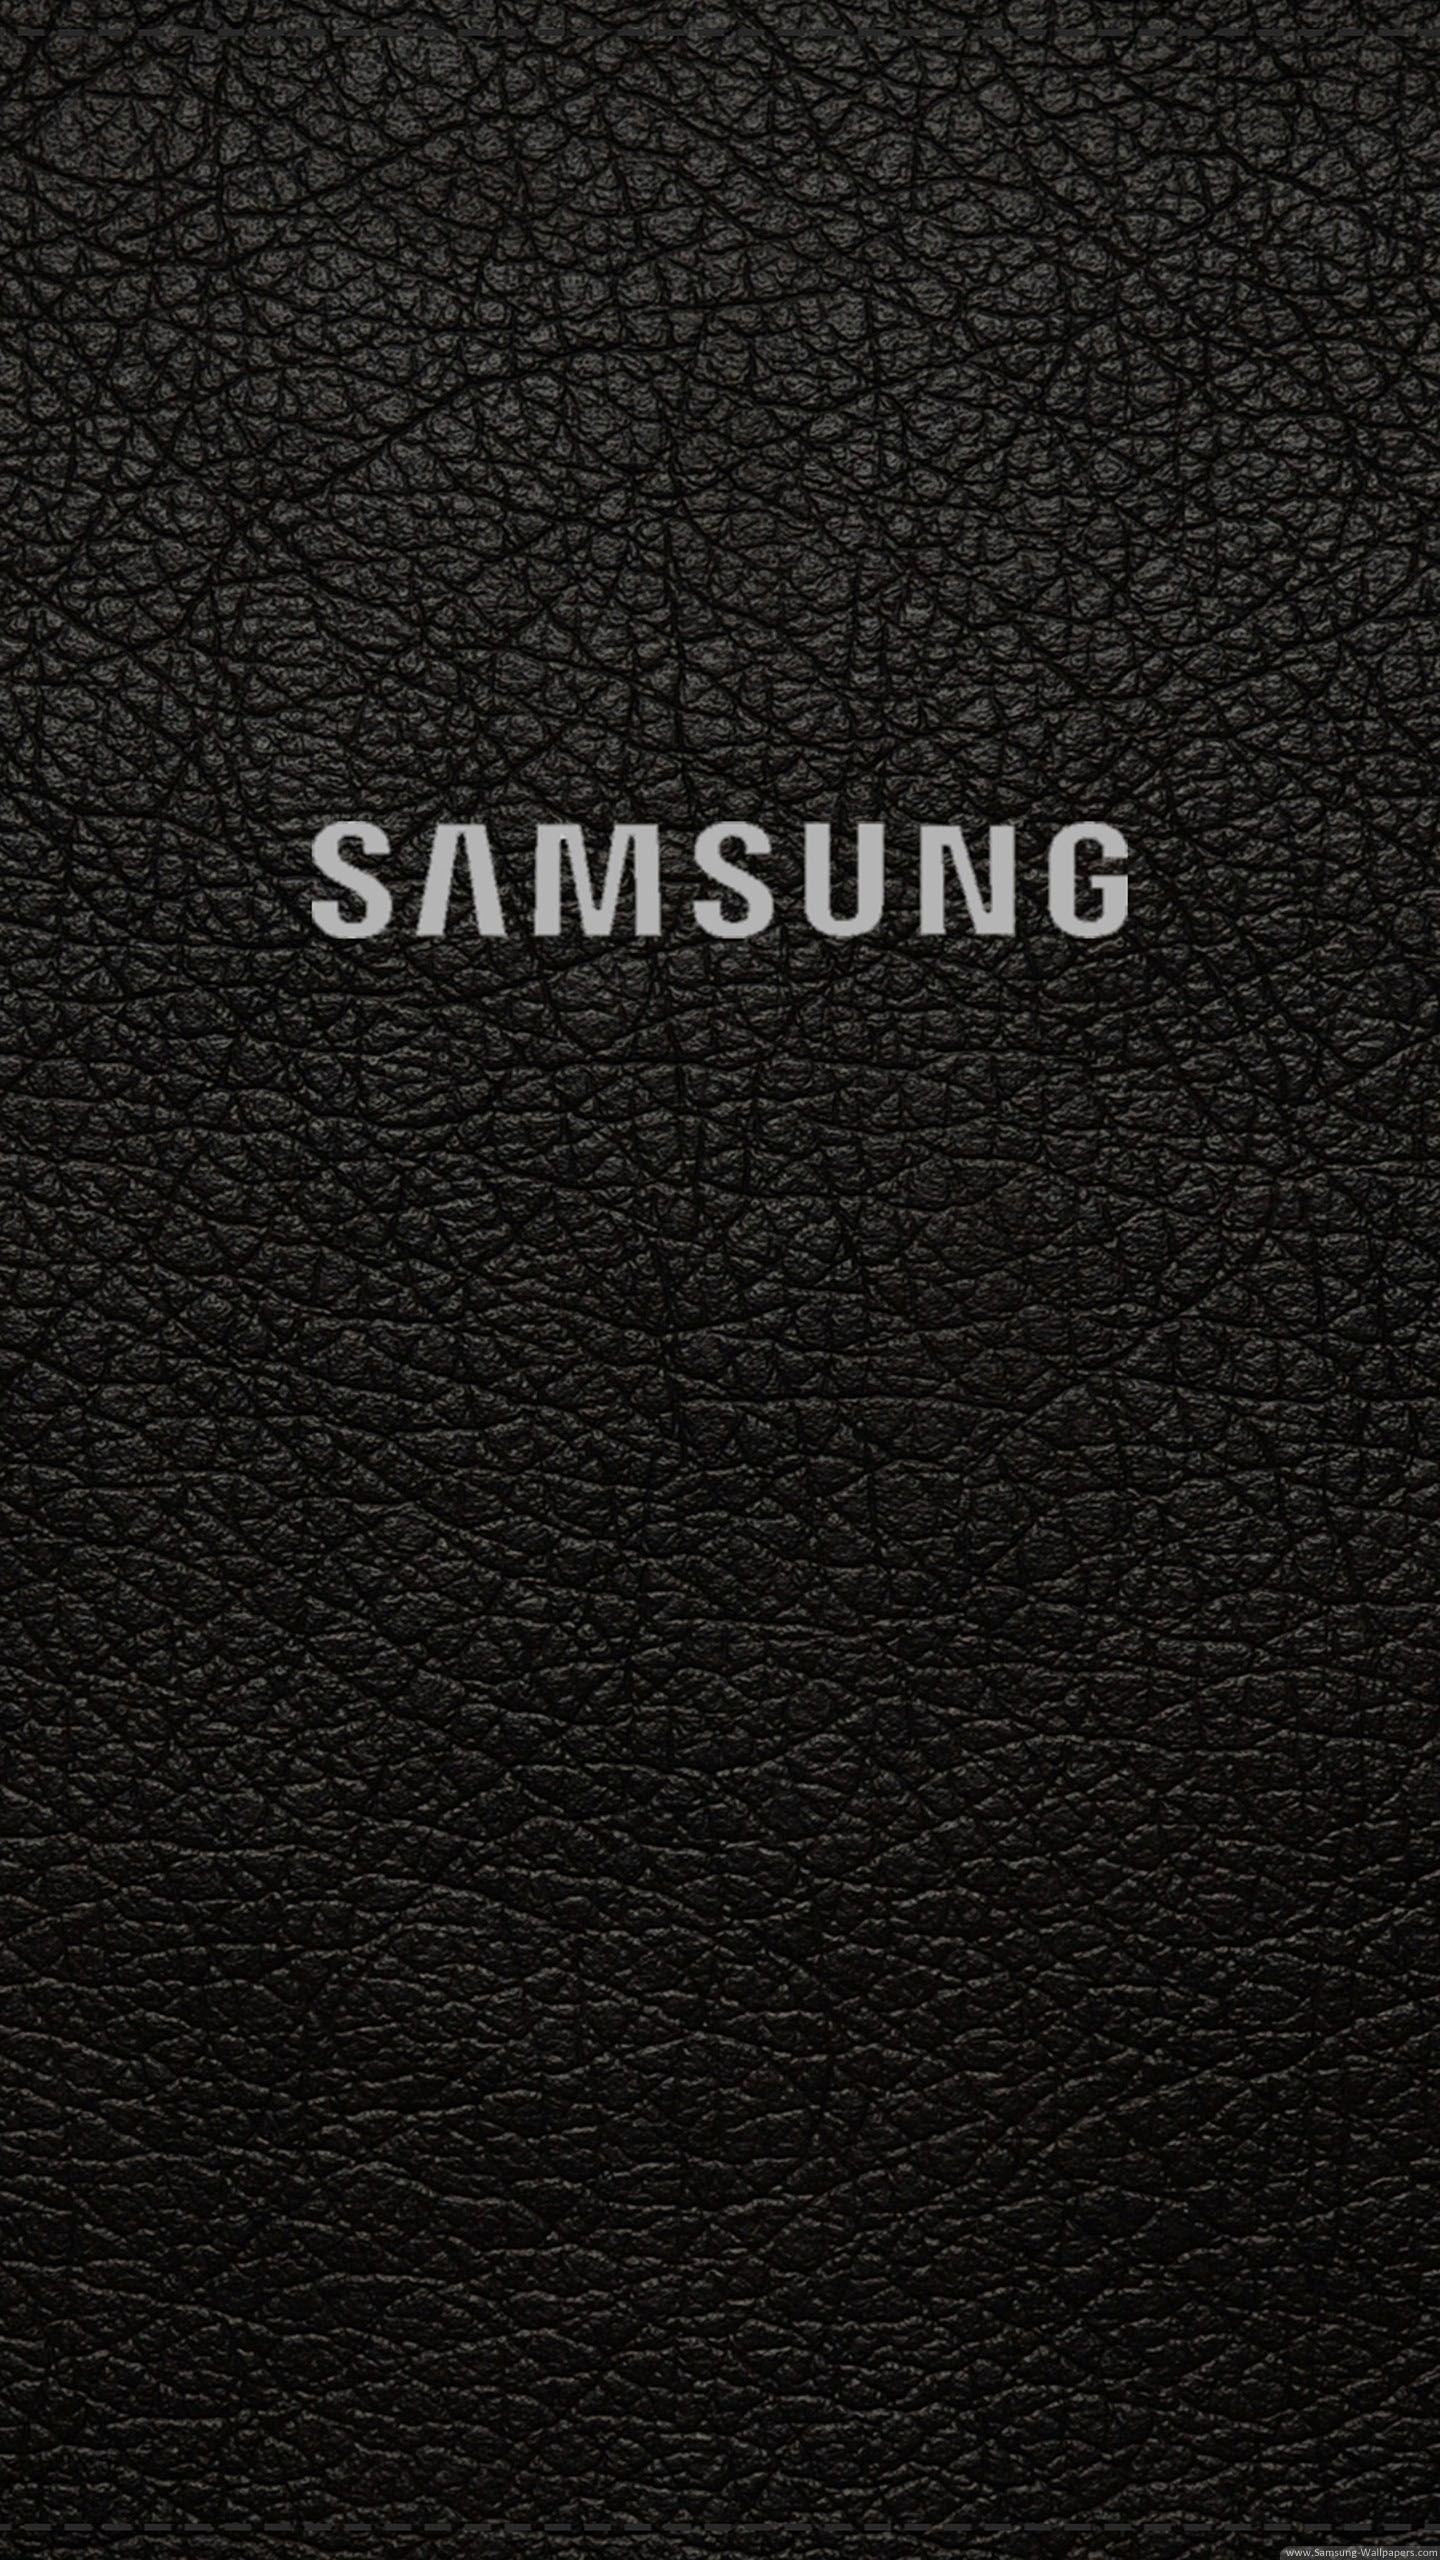 Hd For Samsung Wallpapers